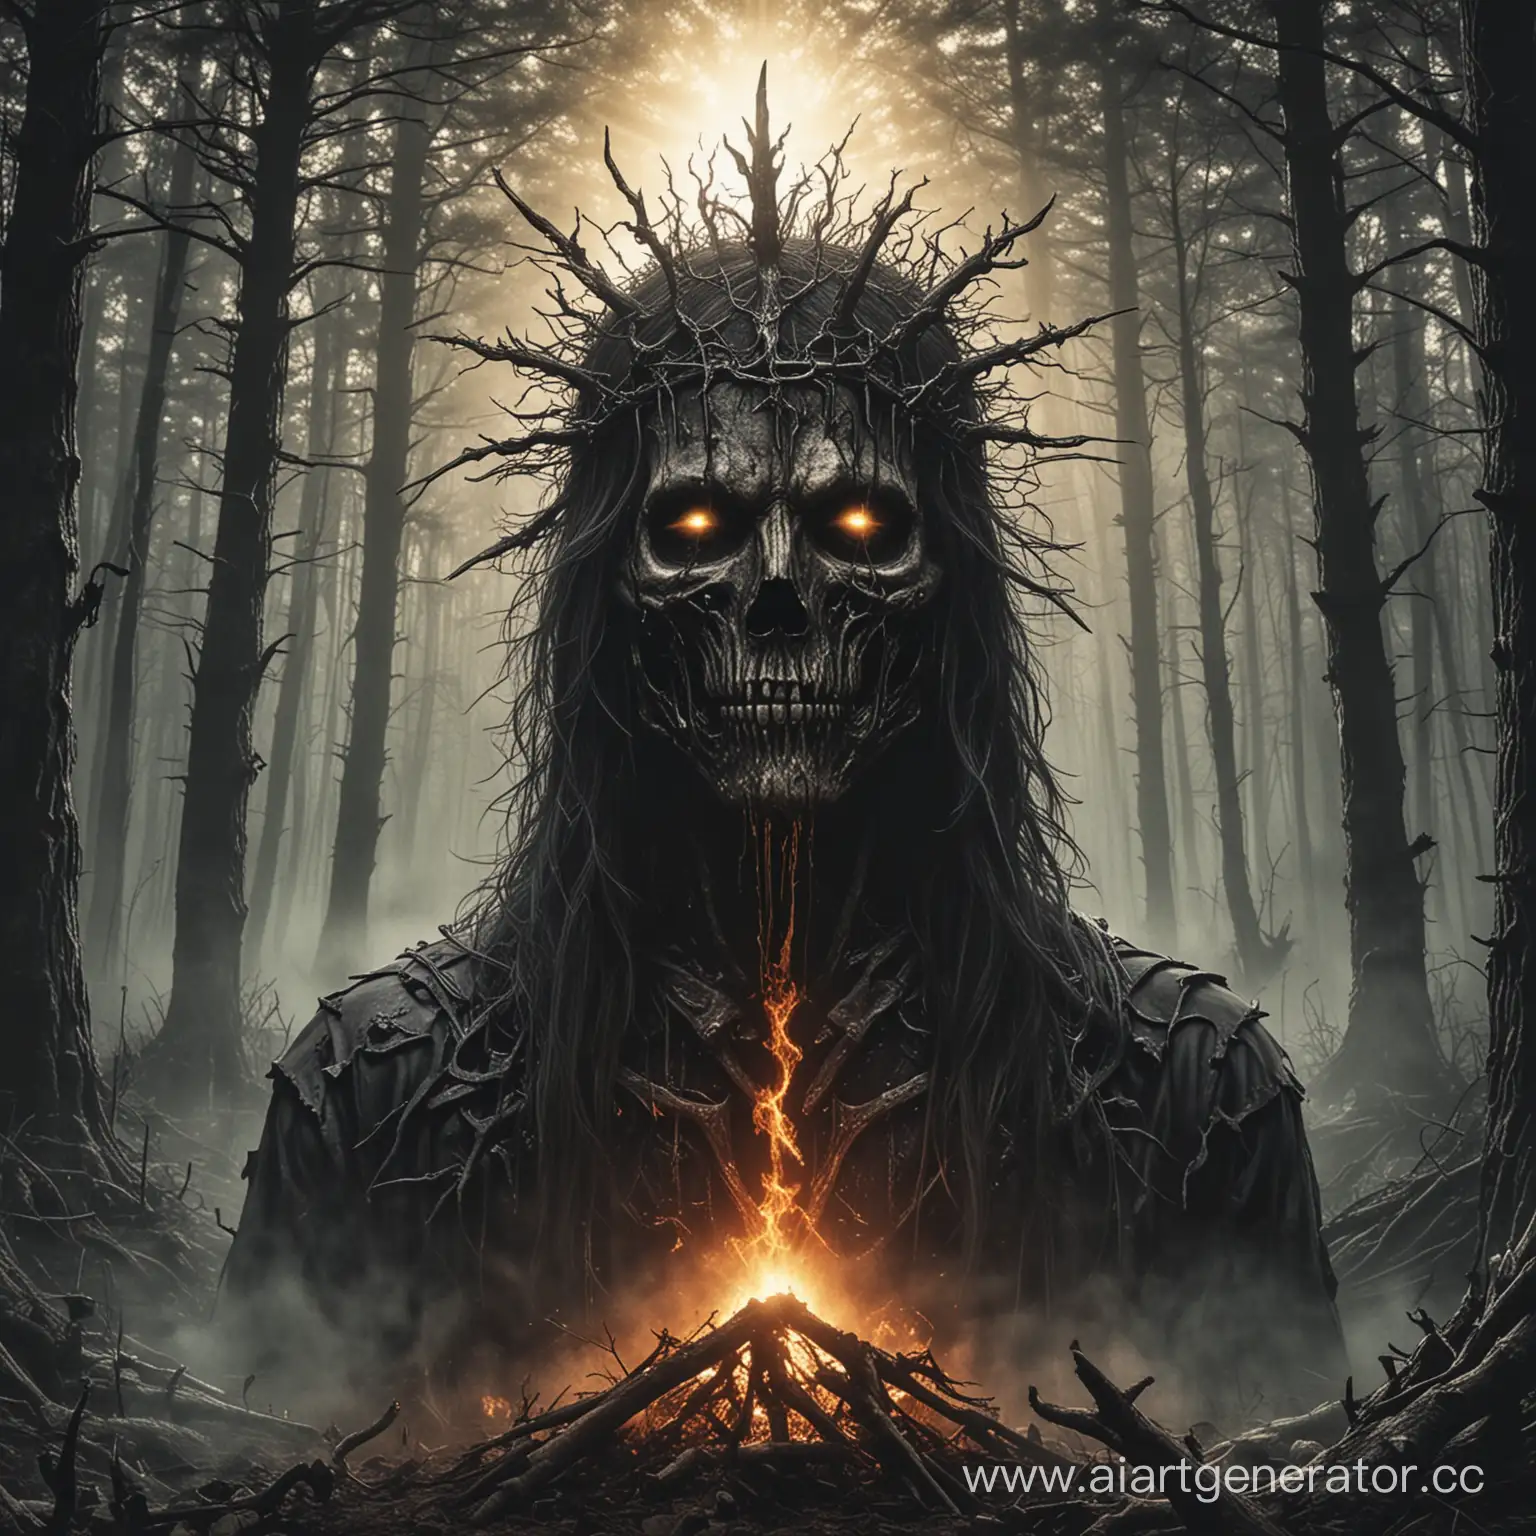 Sunlit-Forest-Scene-with-Black-Metalhead-and-Corpse